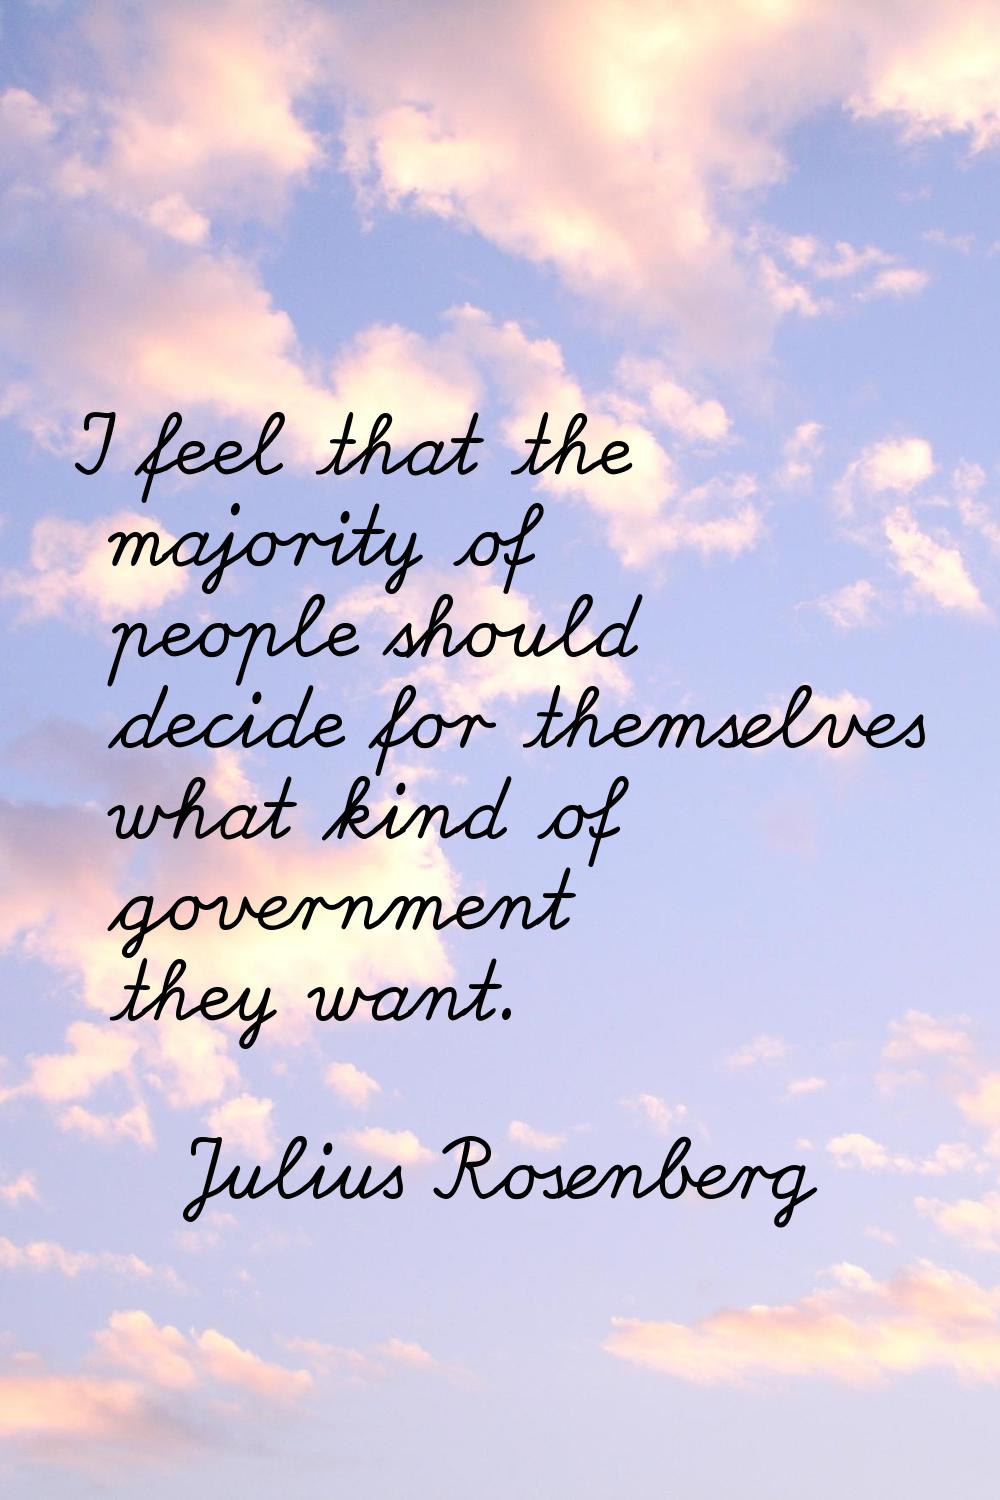 I feel that the majority of people should decide for themselves what kind of government they want.